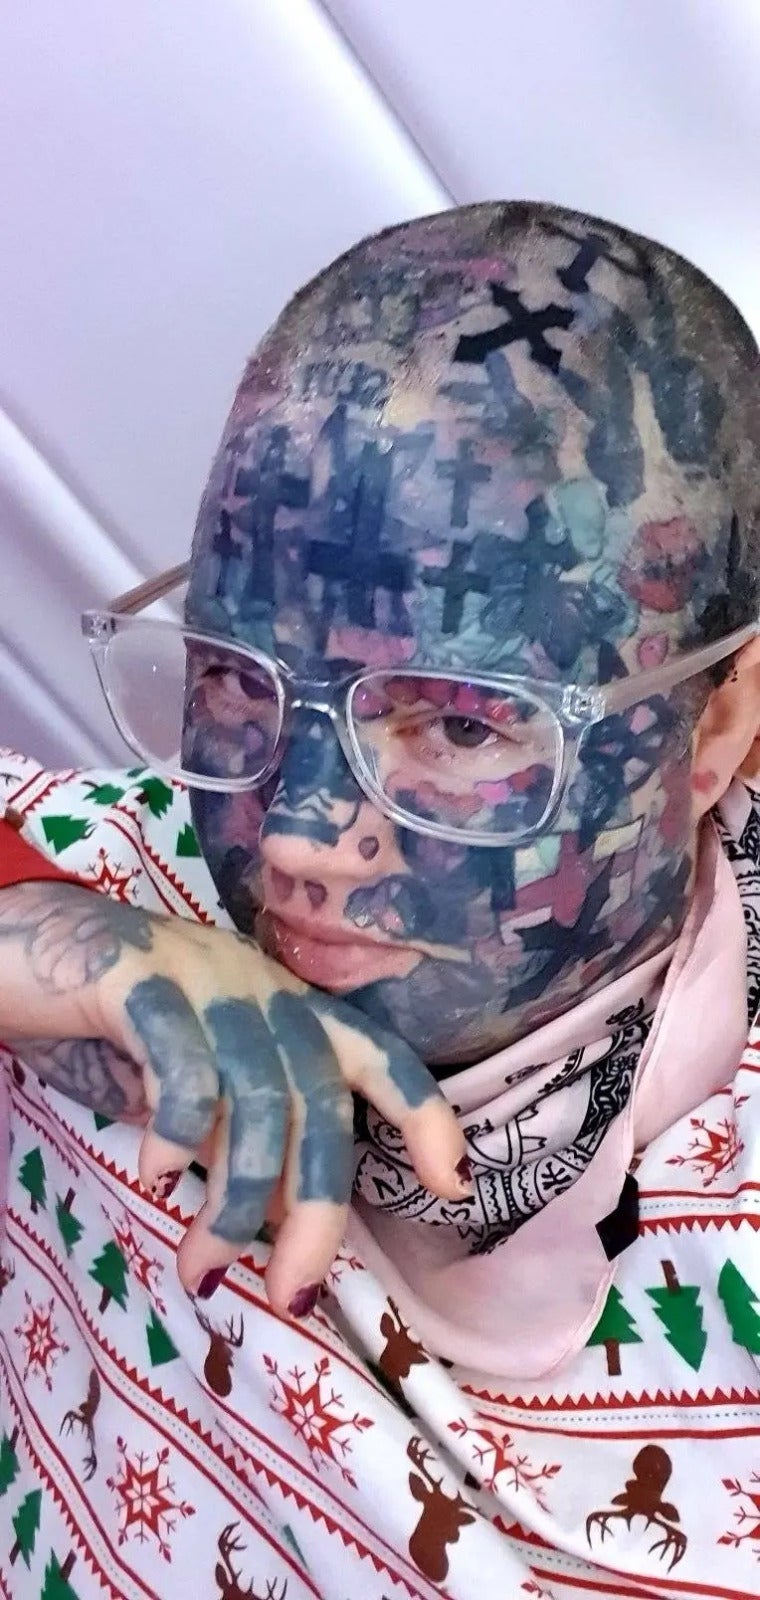 800 tattoos woman cant find job 6